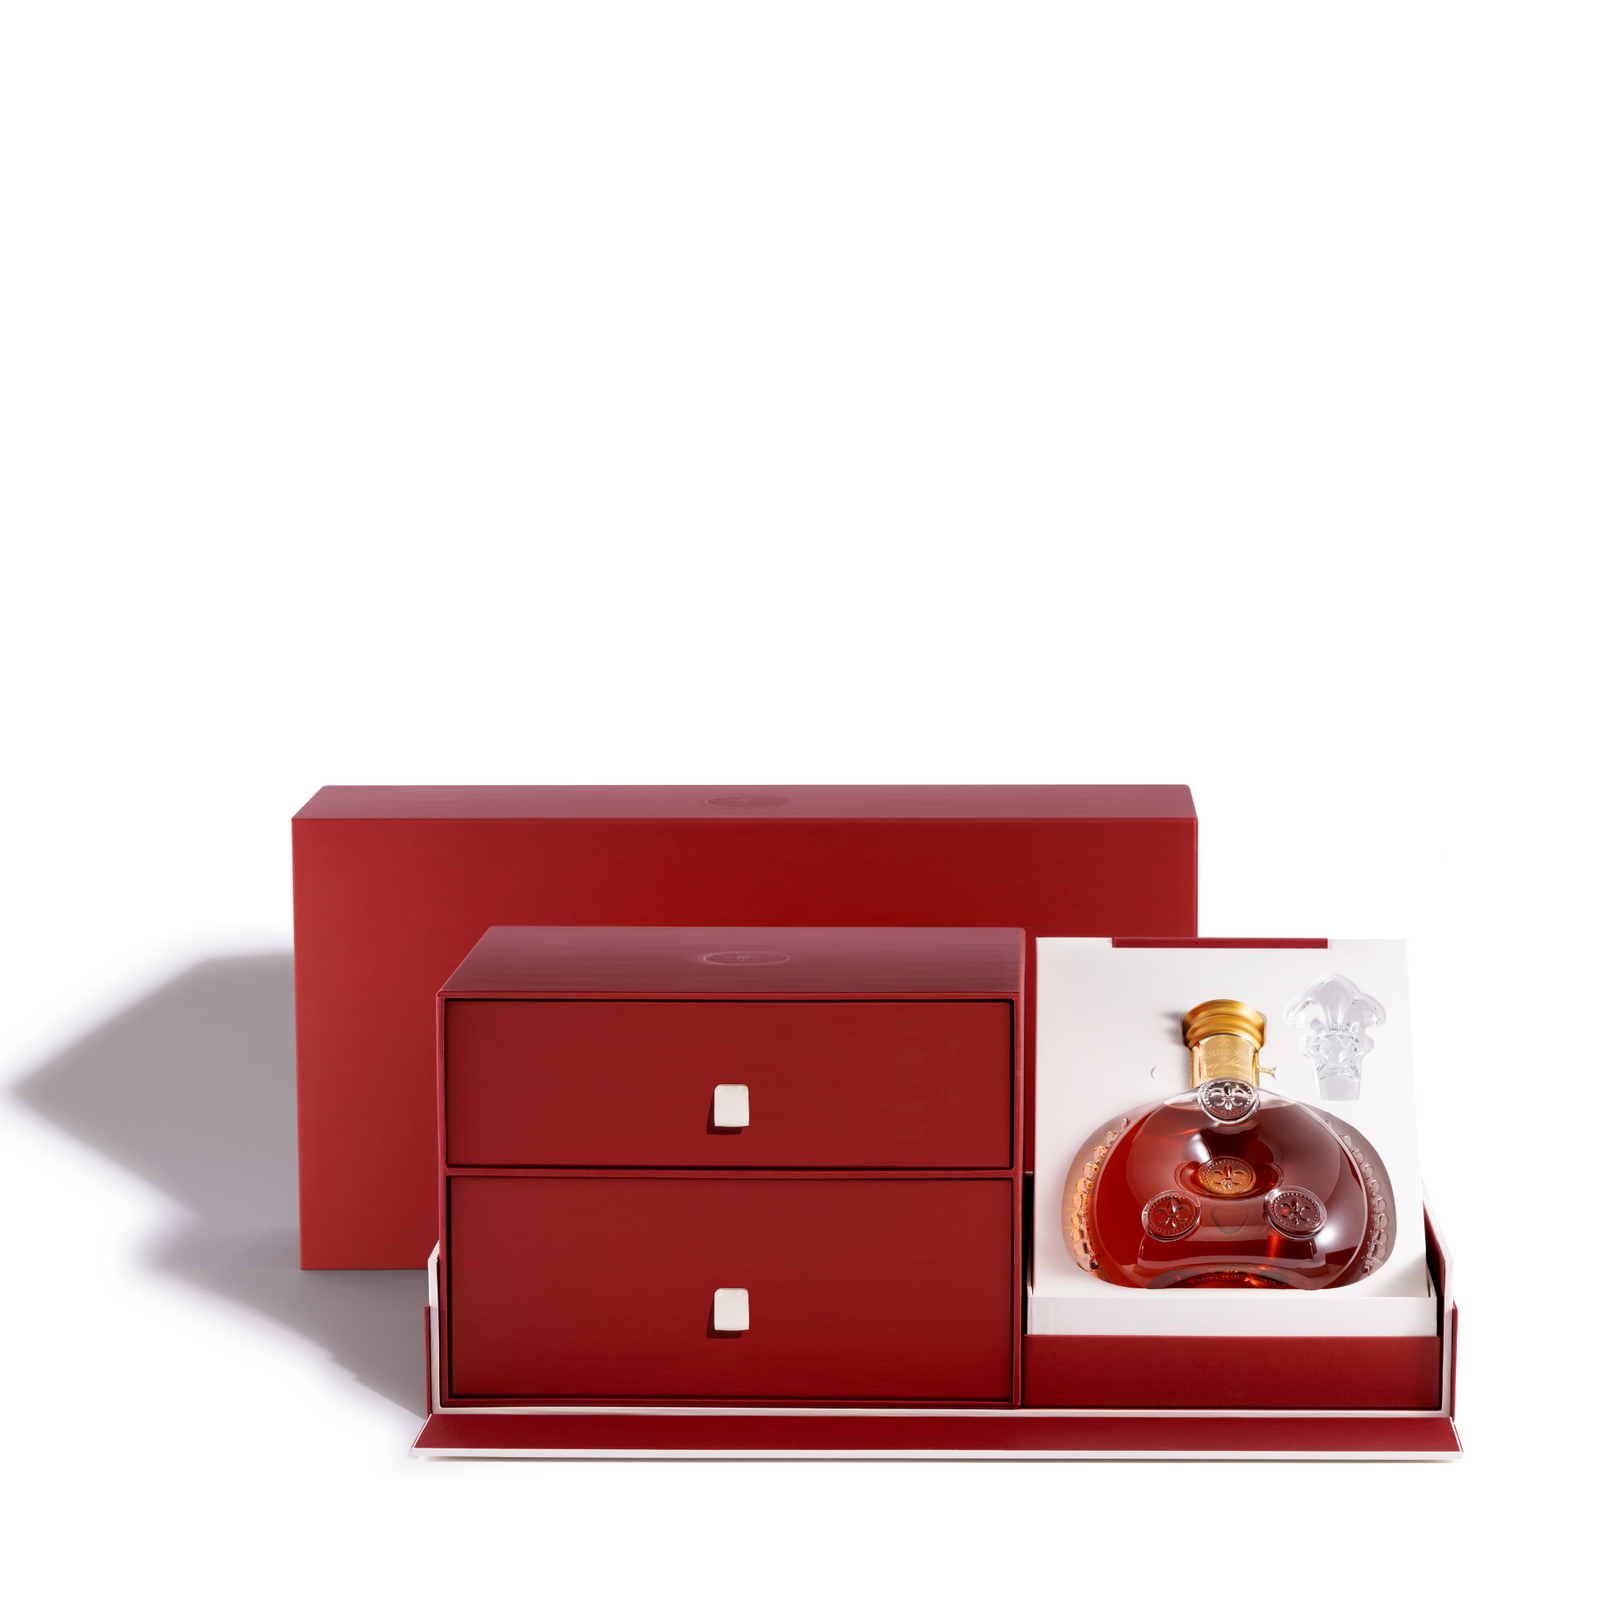 A packshot of a red packaging box of the souvenir set with the LOUIS XIII decanter exposed